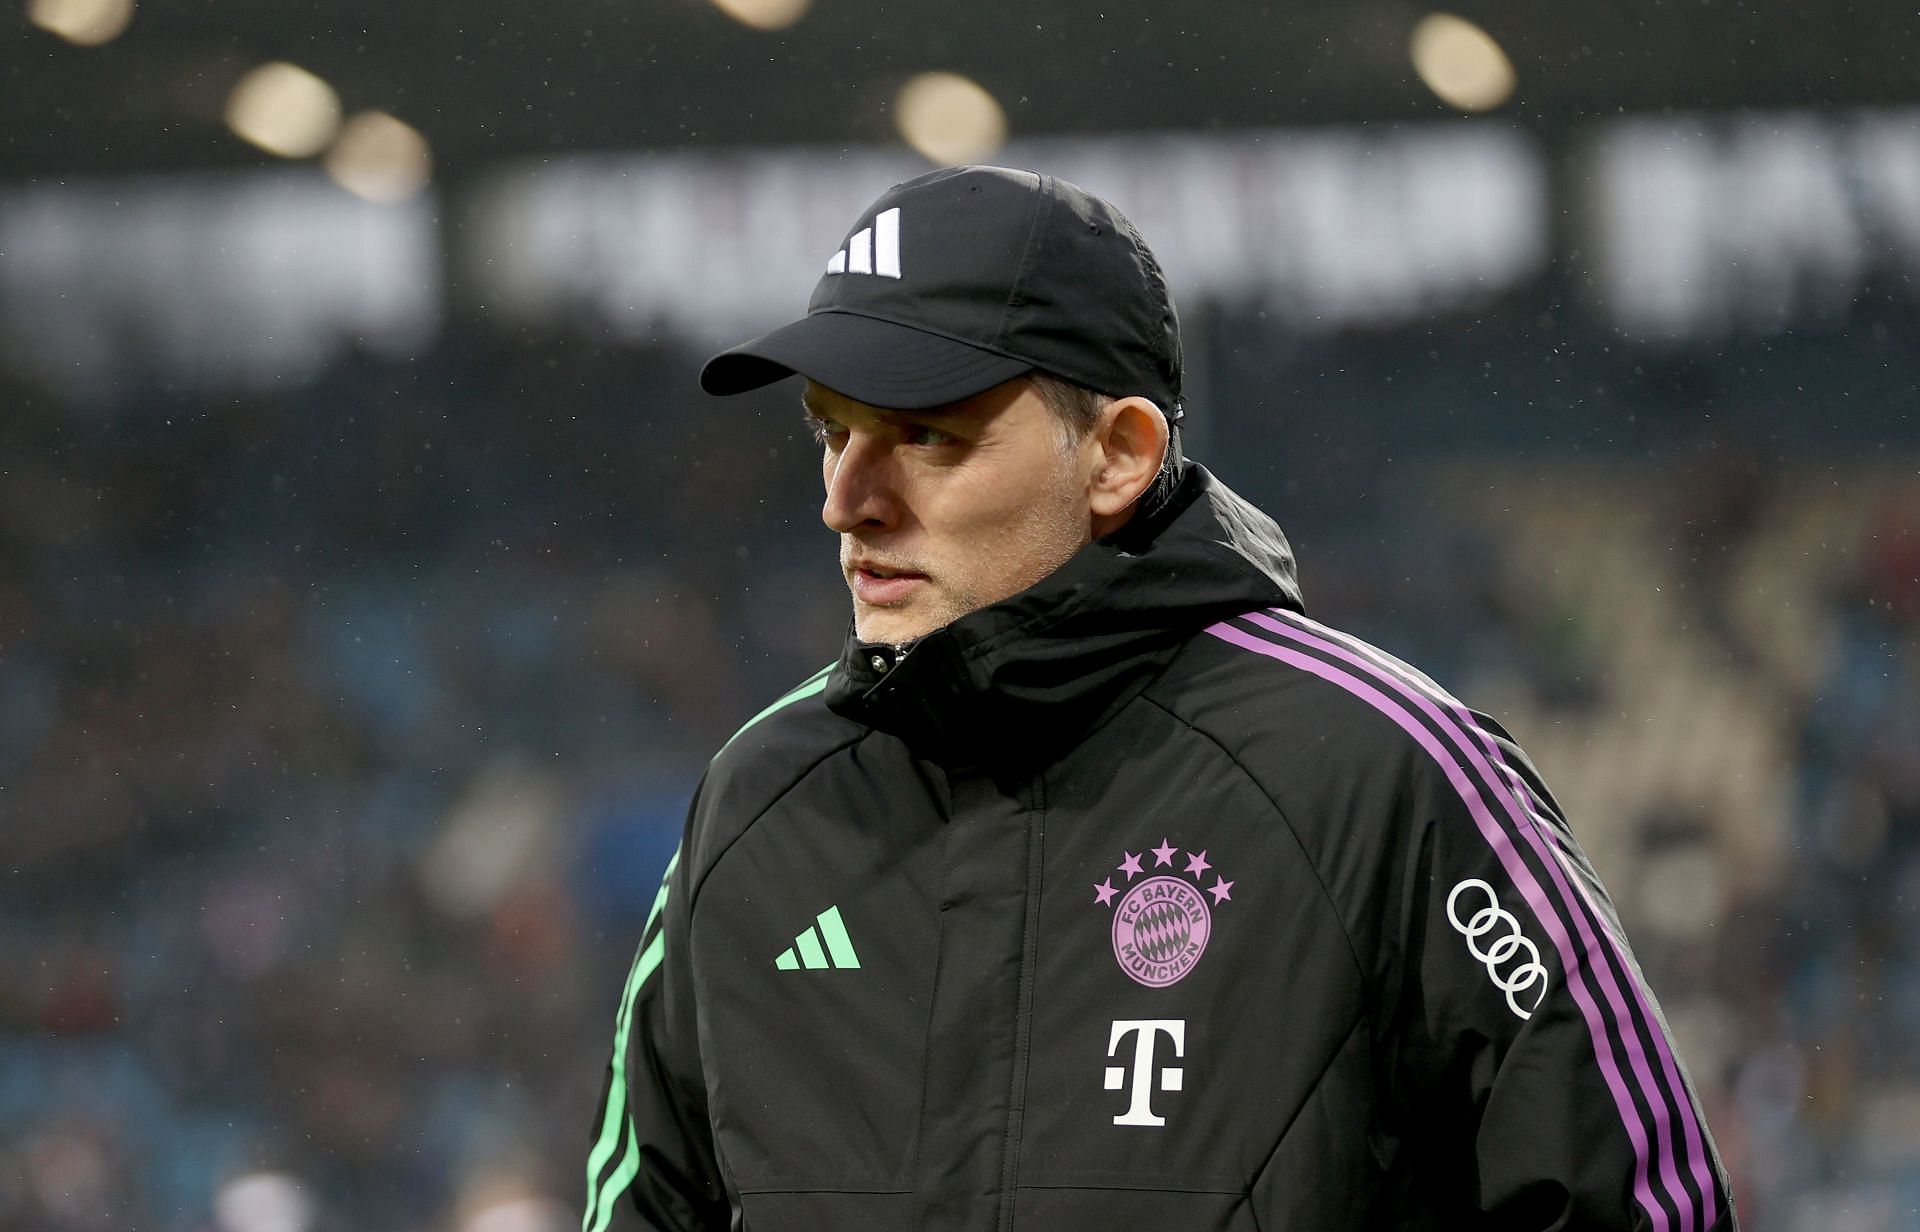 Tuchel is expected to step down from his role as Bayern Munich head coach this summer